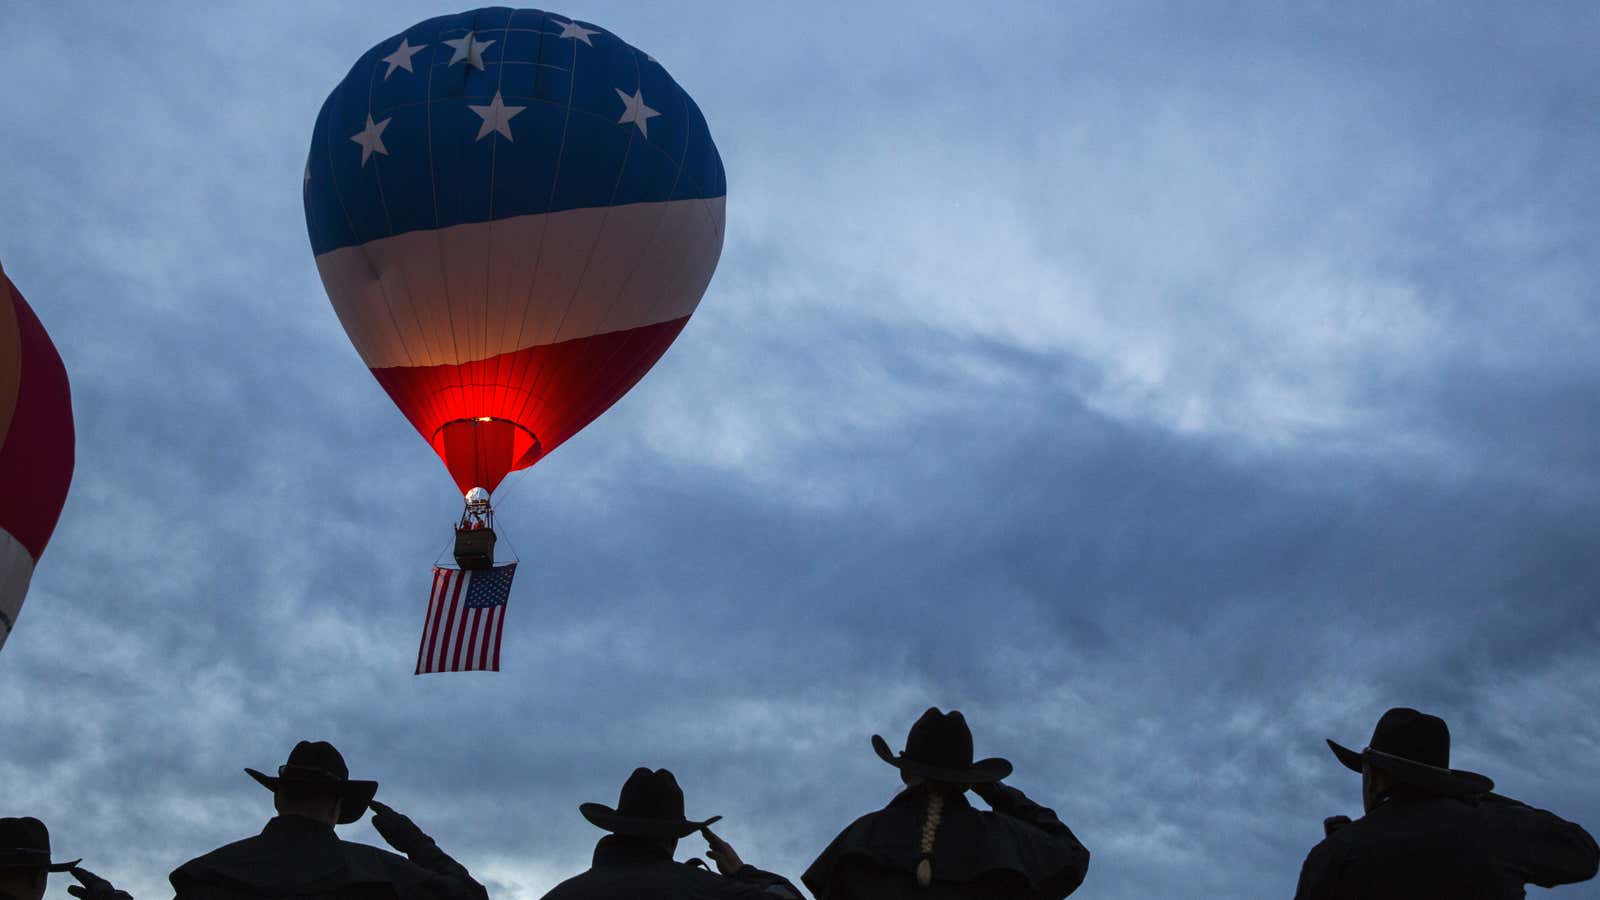 America’s going solo with its ballooning debt.